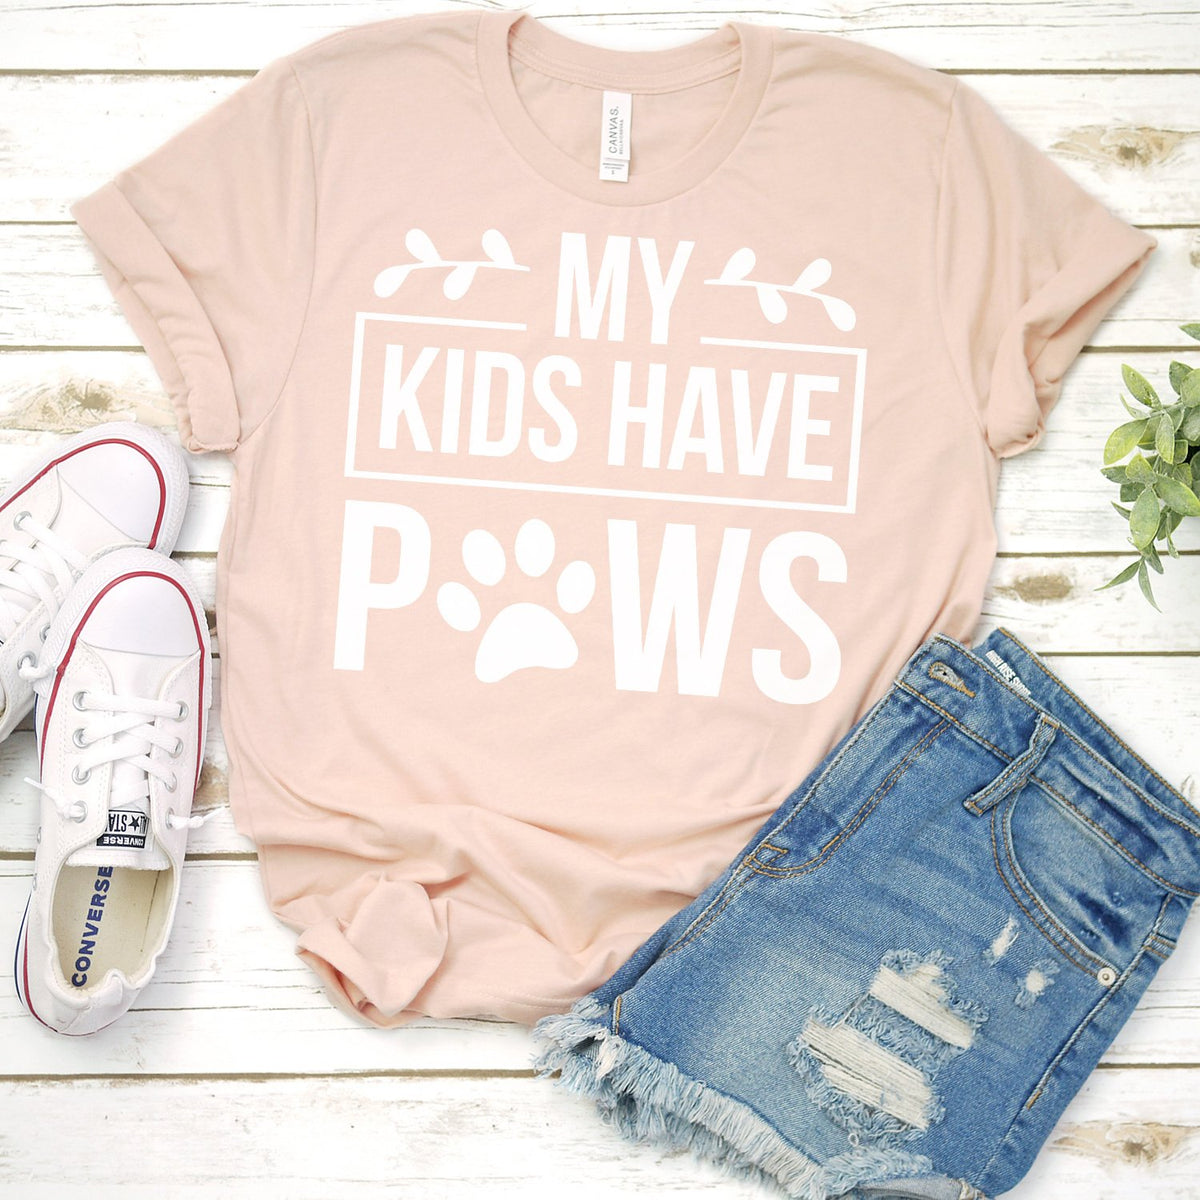 My Kids Have Paws - Short Sleeve Tee Shirt